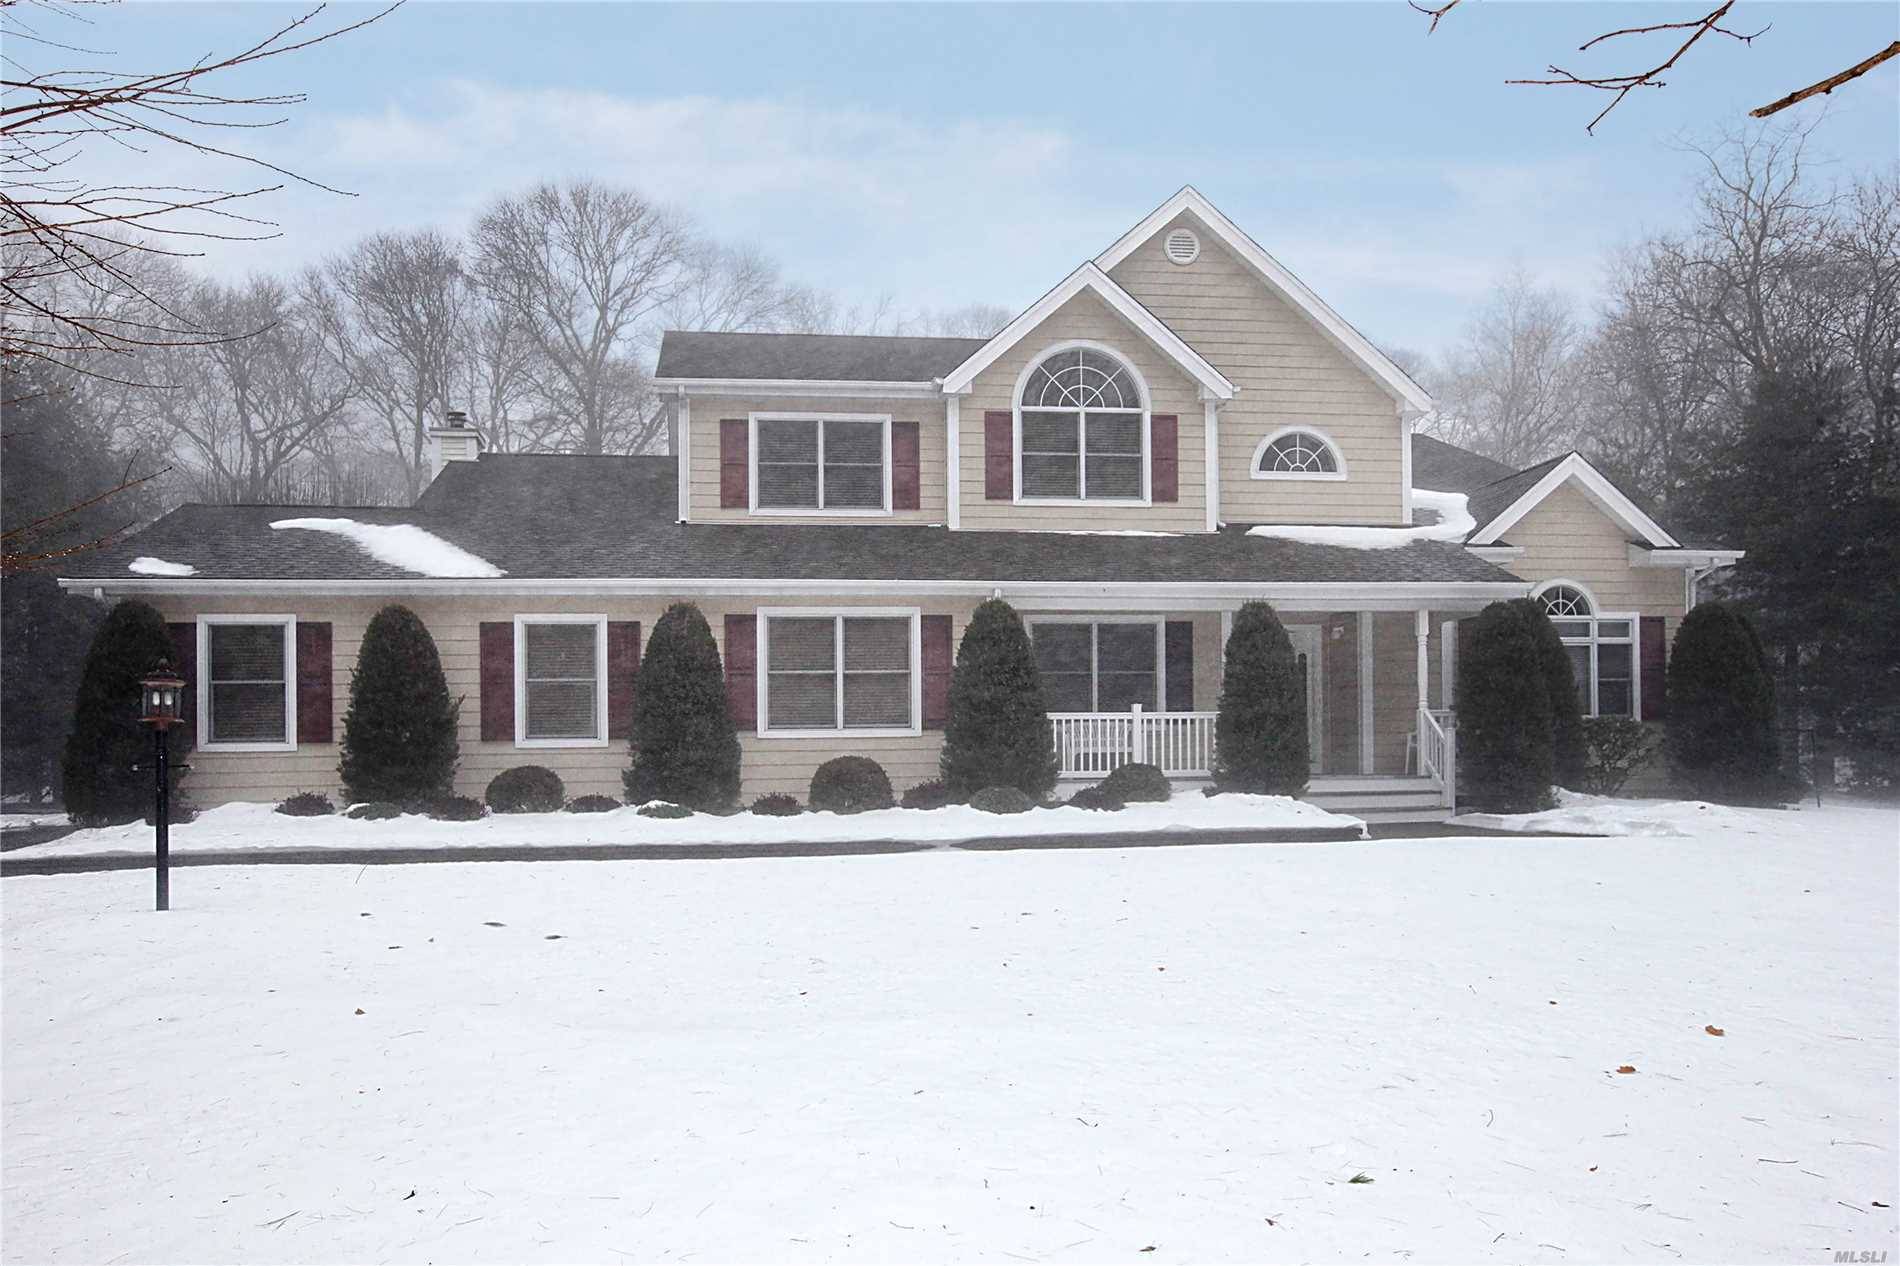 Amazing Opportunity To Live South Of The Hwy In A Prominent E Moriches Community.